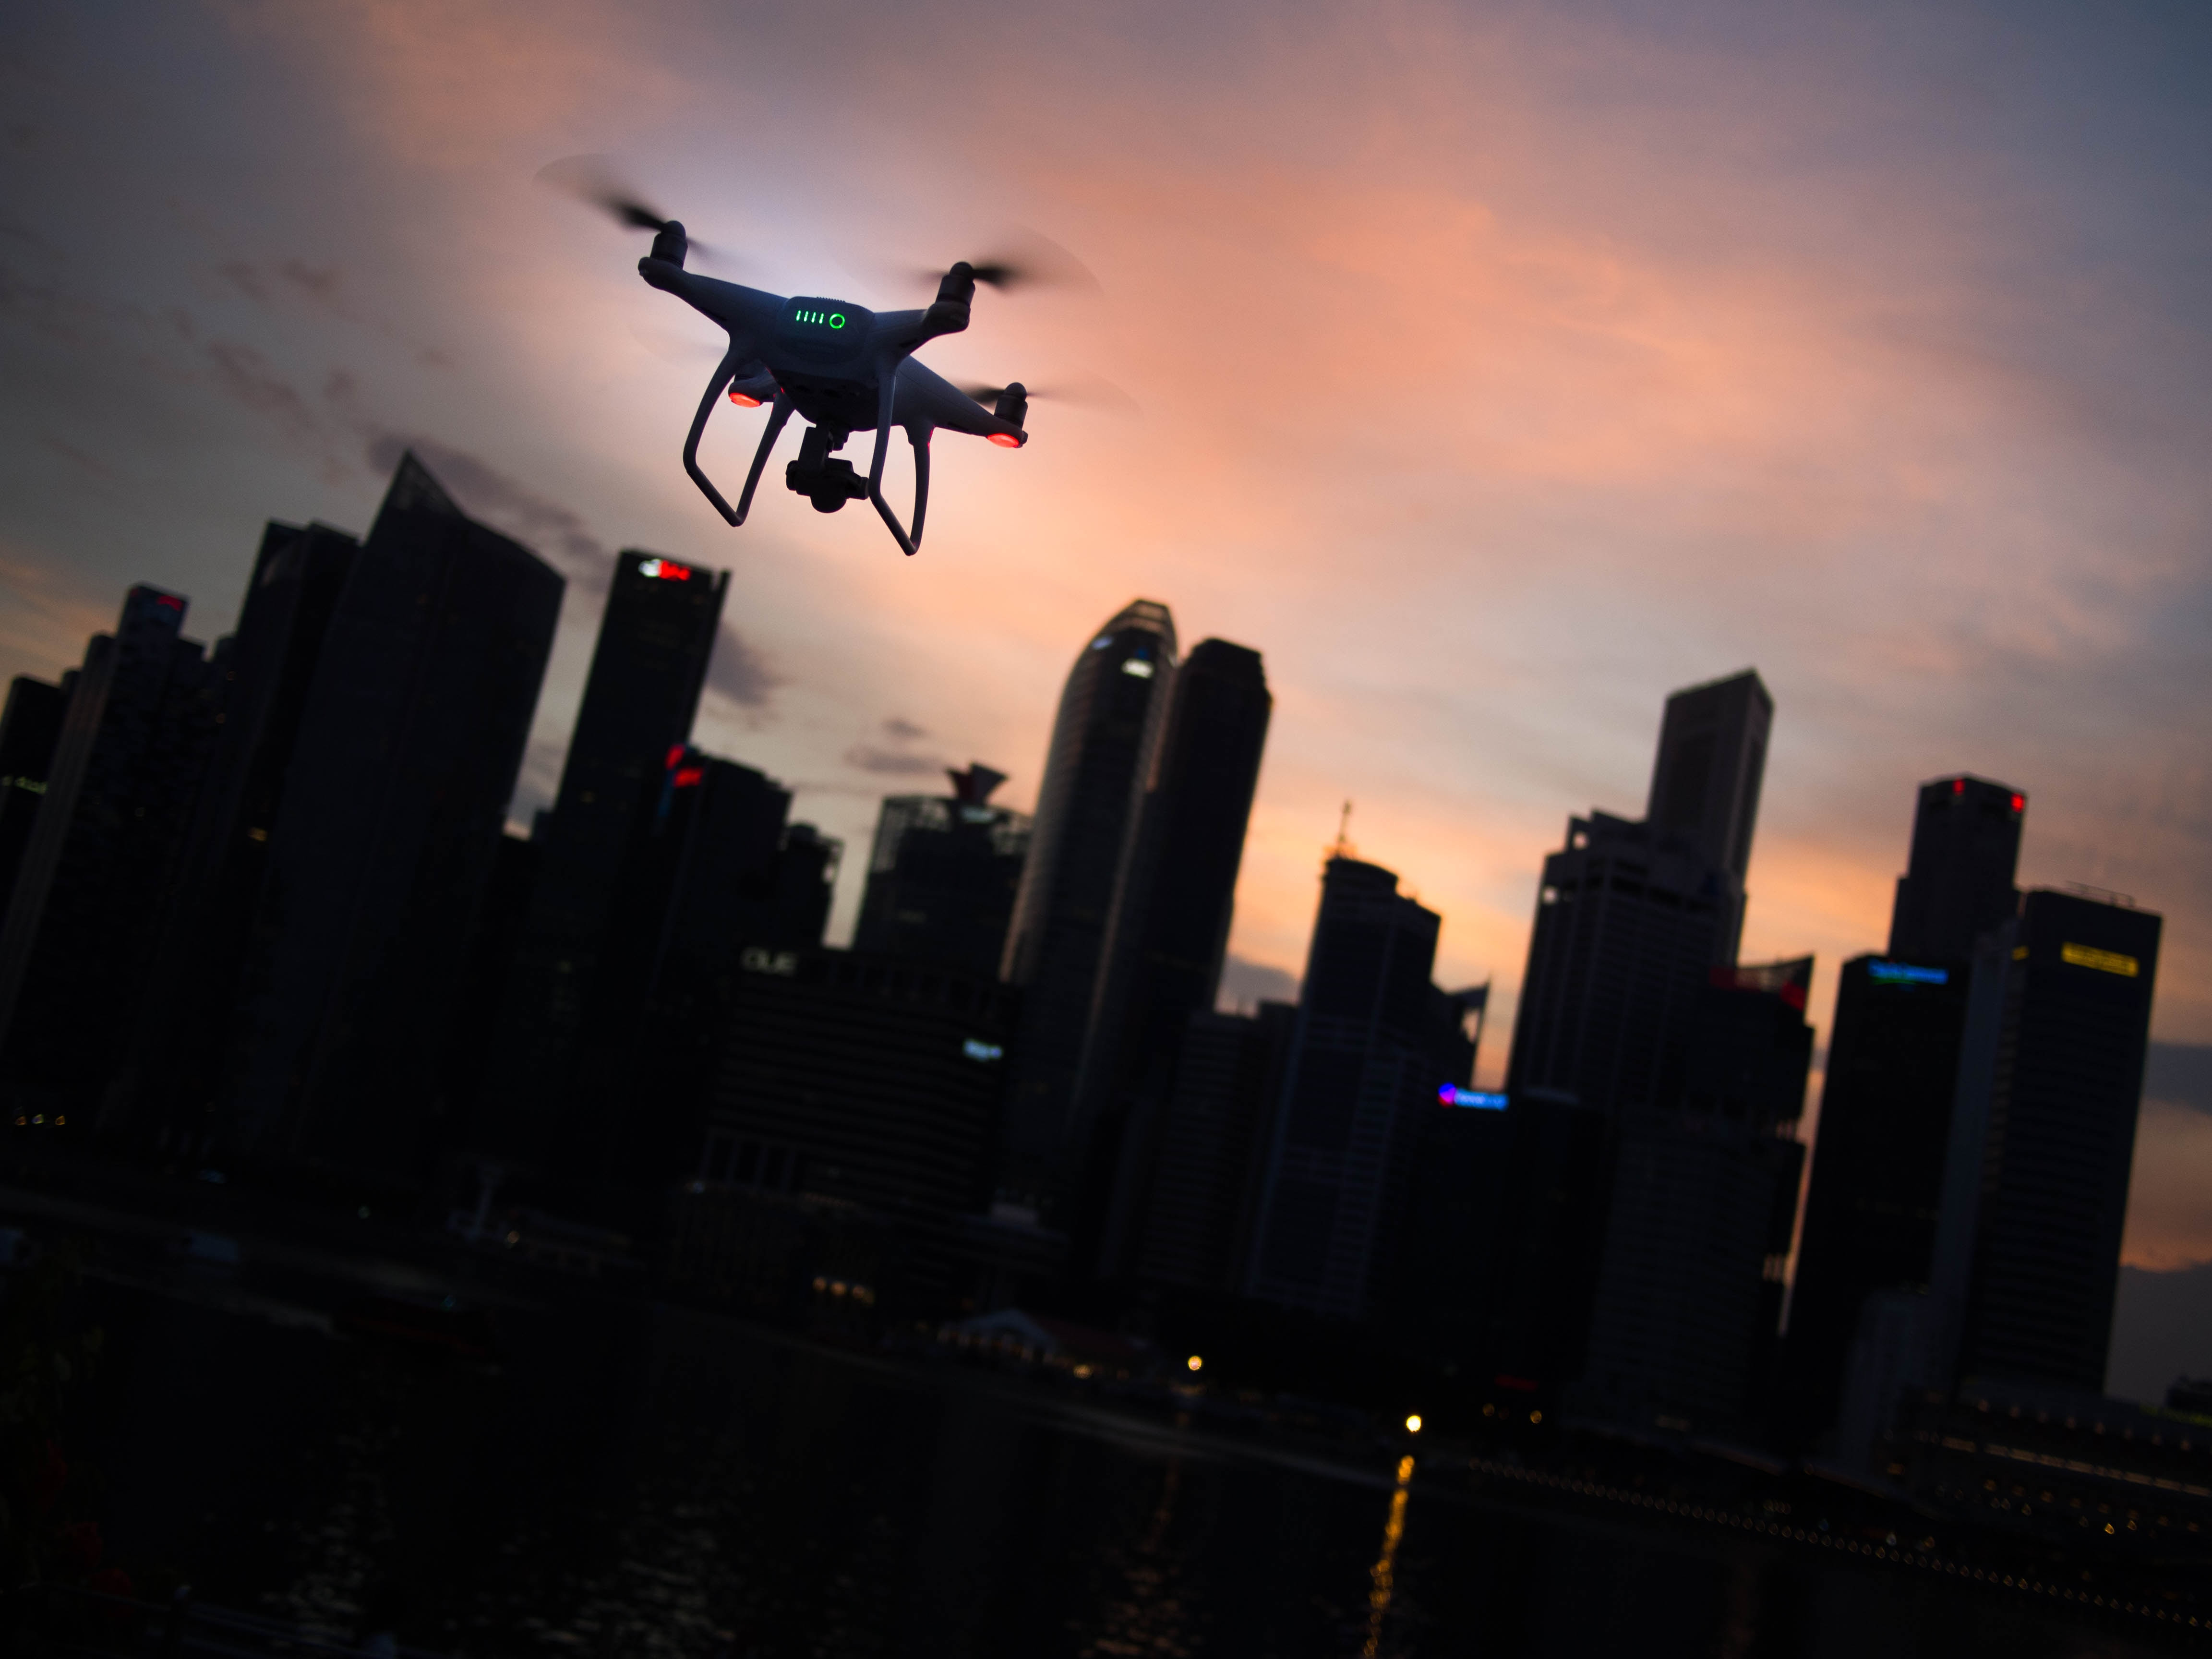 Drone Night Photography: How to Capture Stunning Images